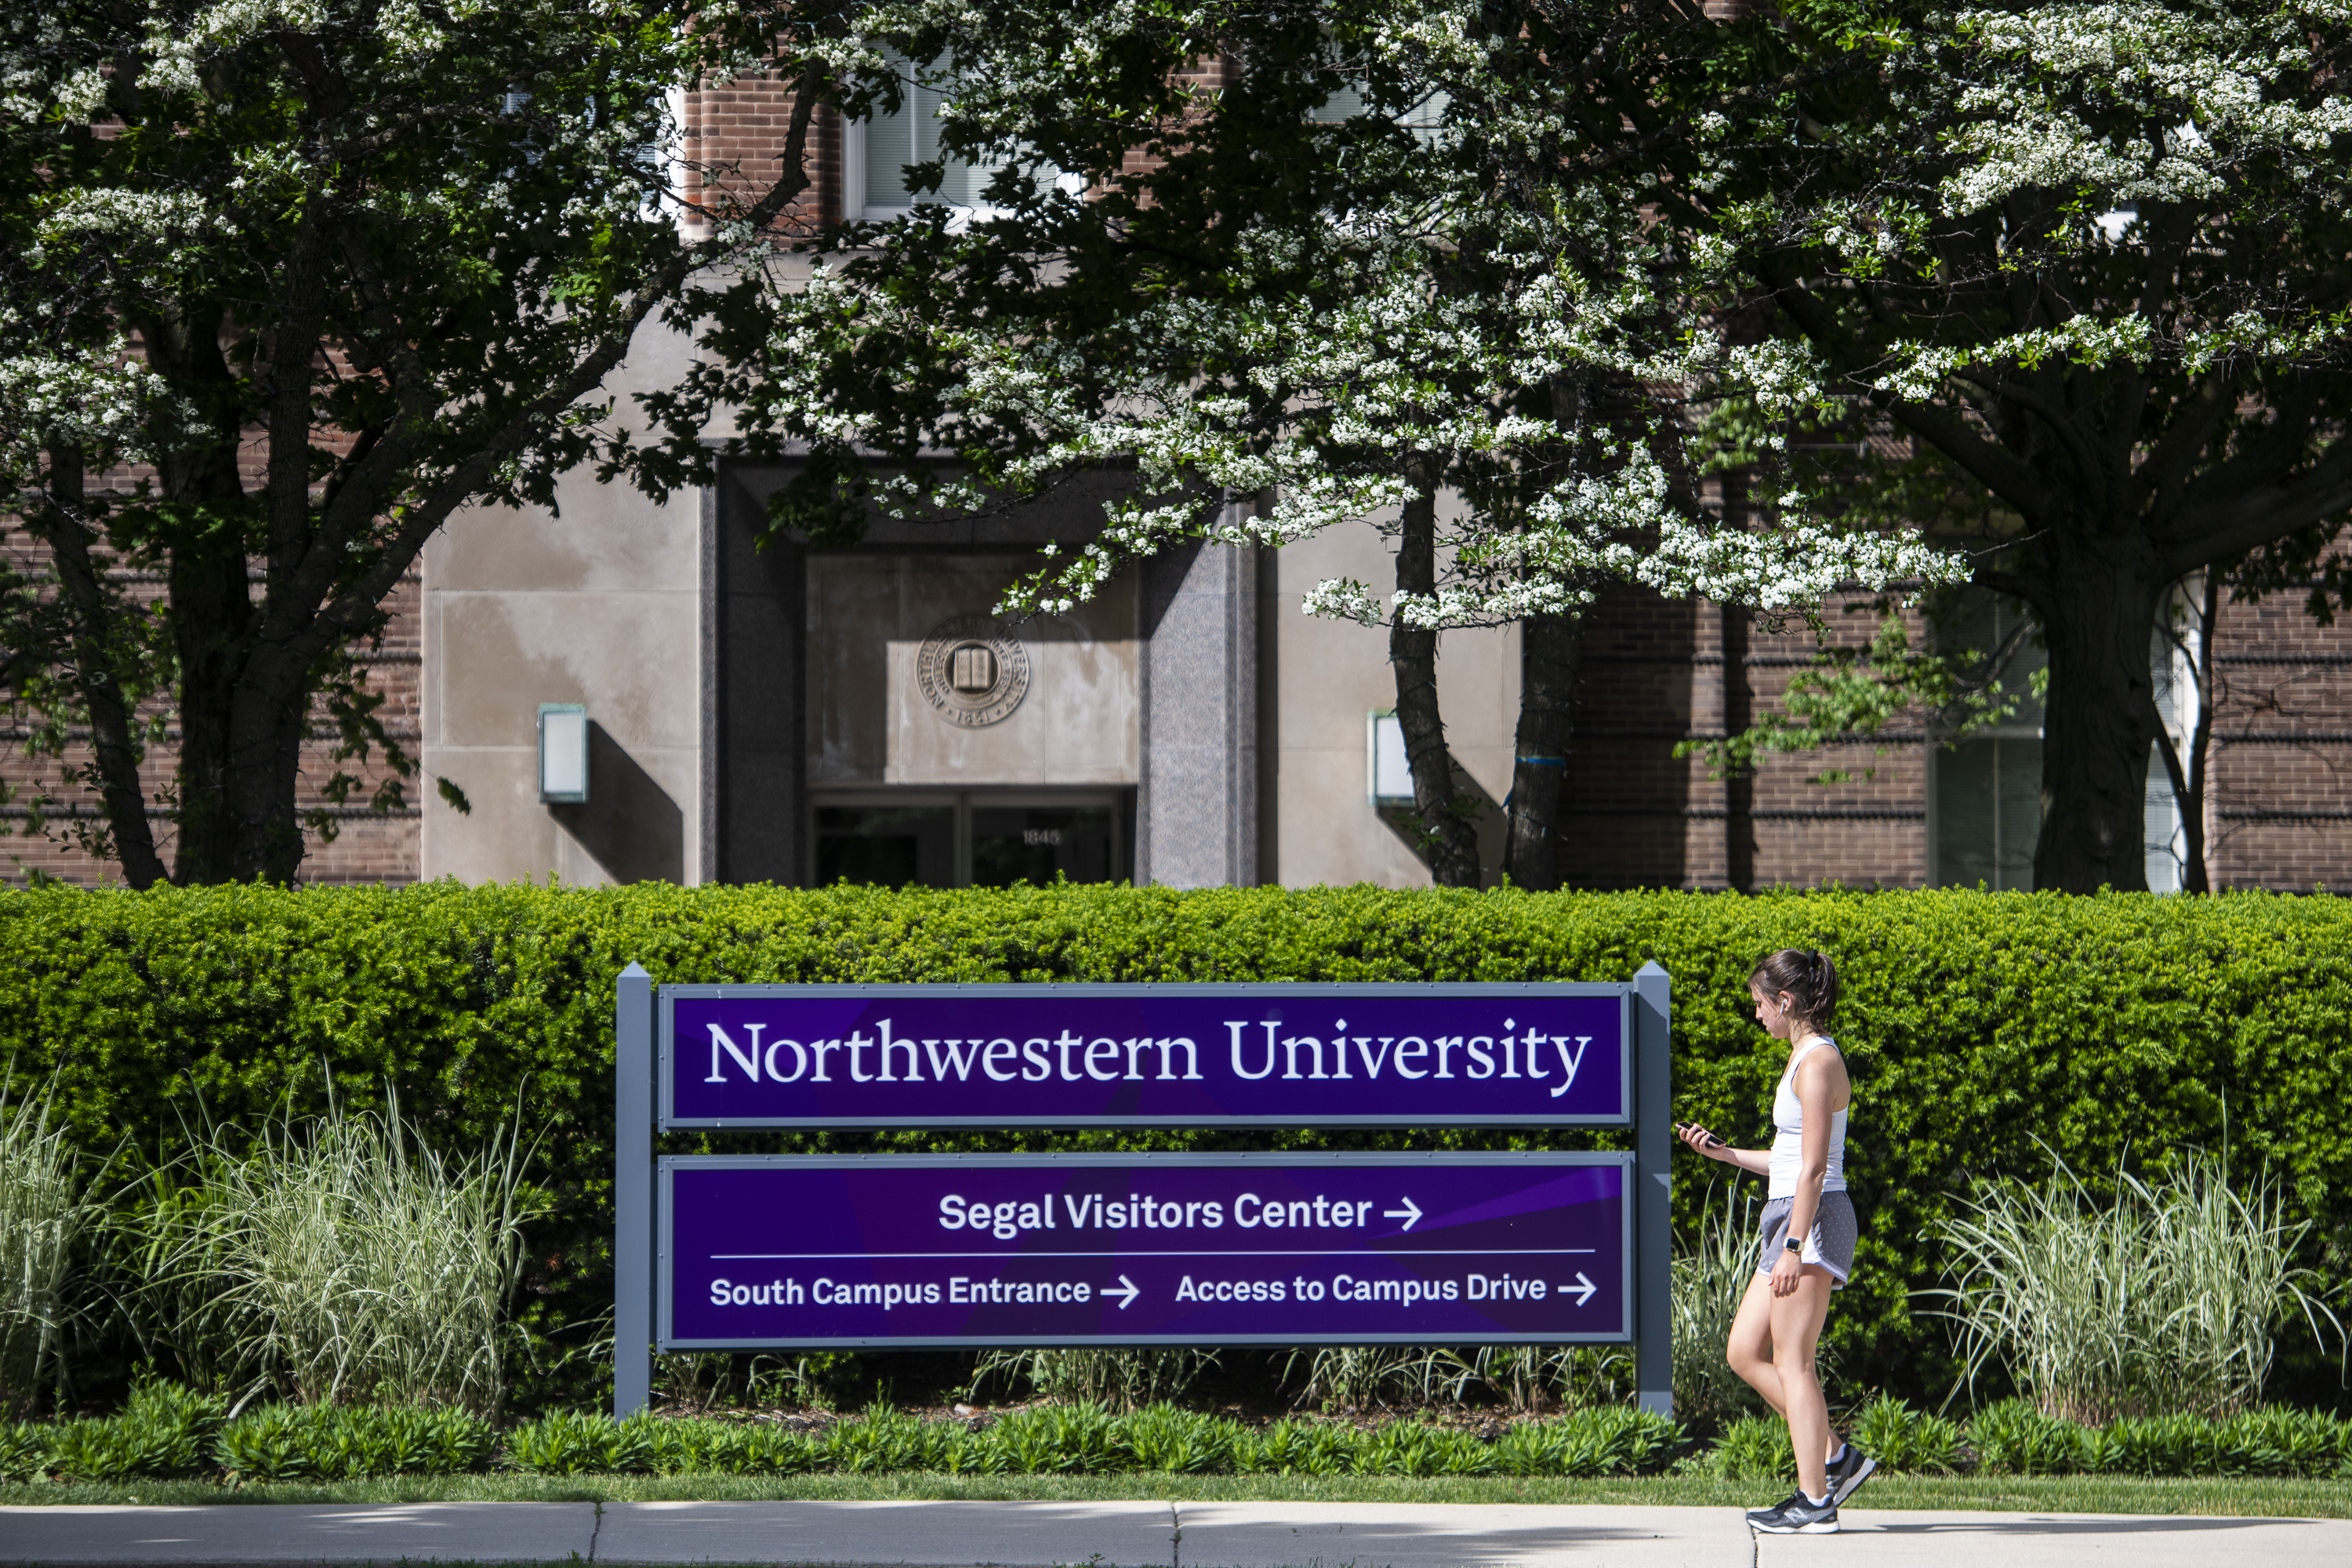 A woman walks on the campus of Northwestern University in Evanston.